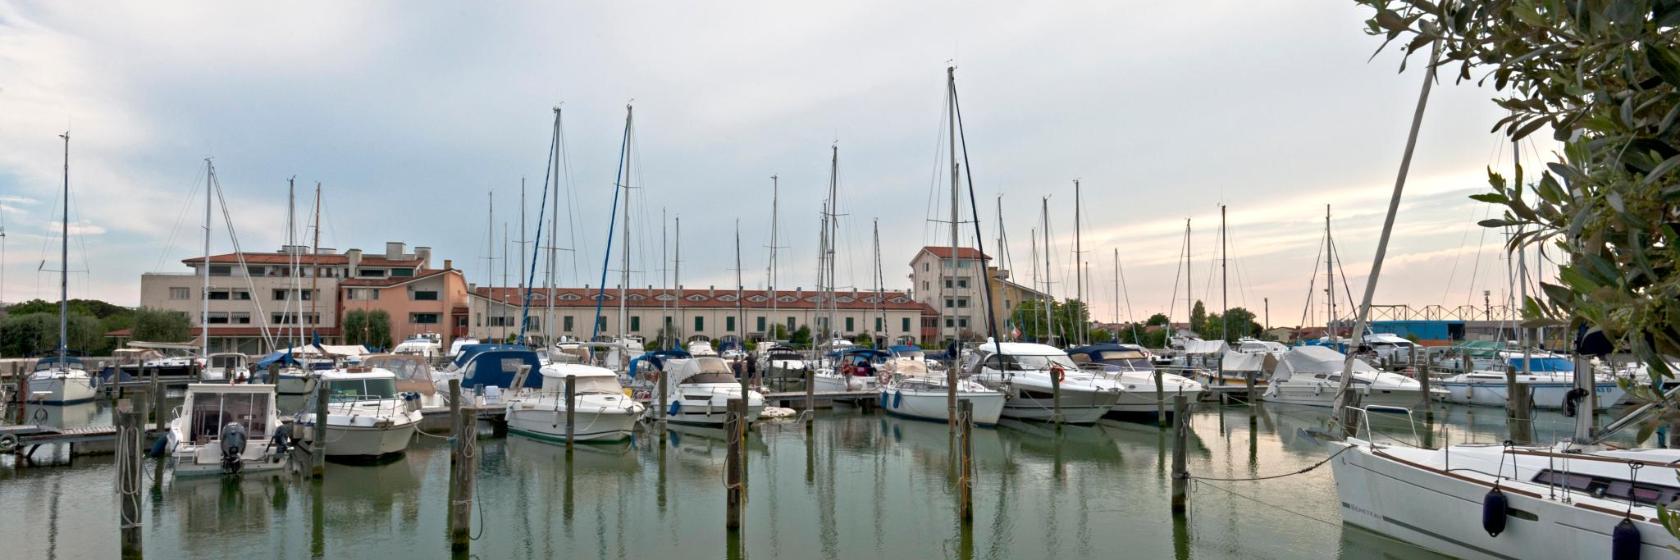 The 10 best hotels near Darsena dell'Orologio in Caorle, Italy